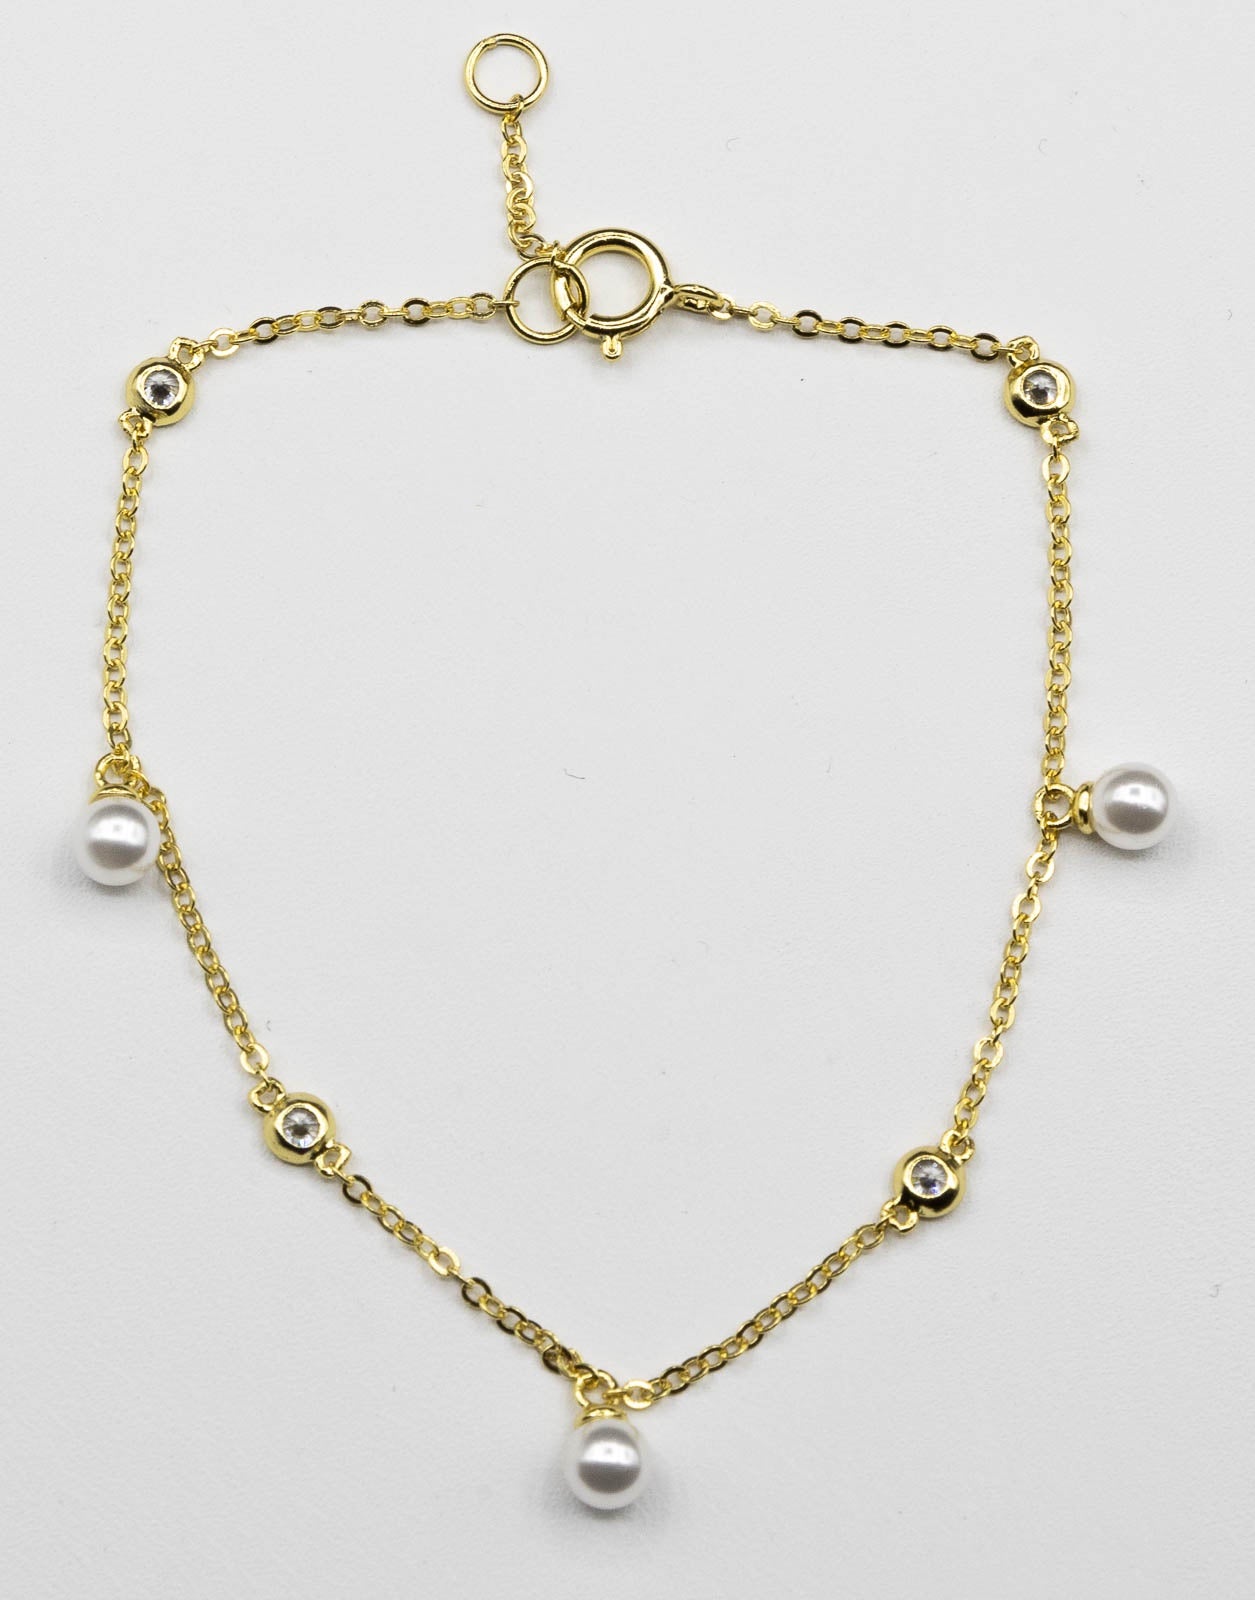 Gold and Pearl Dangle Bracelet